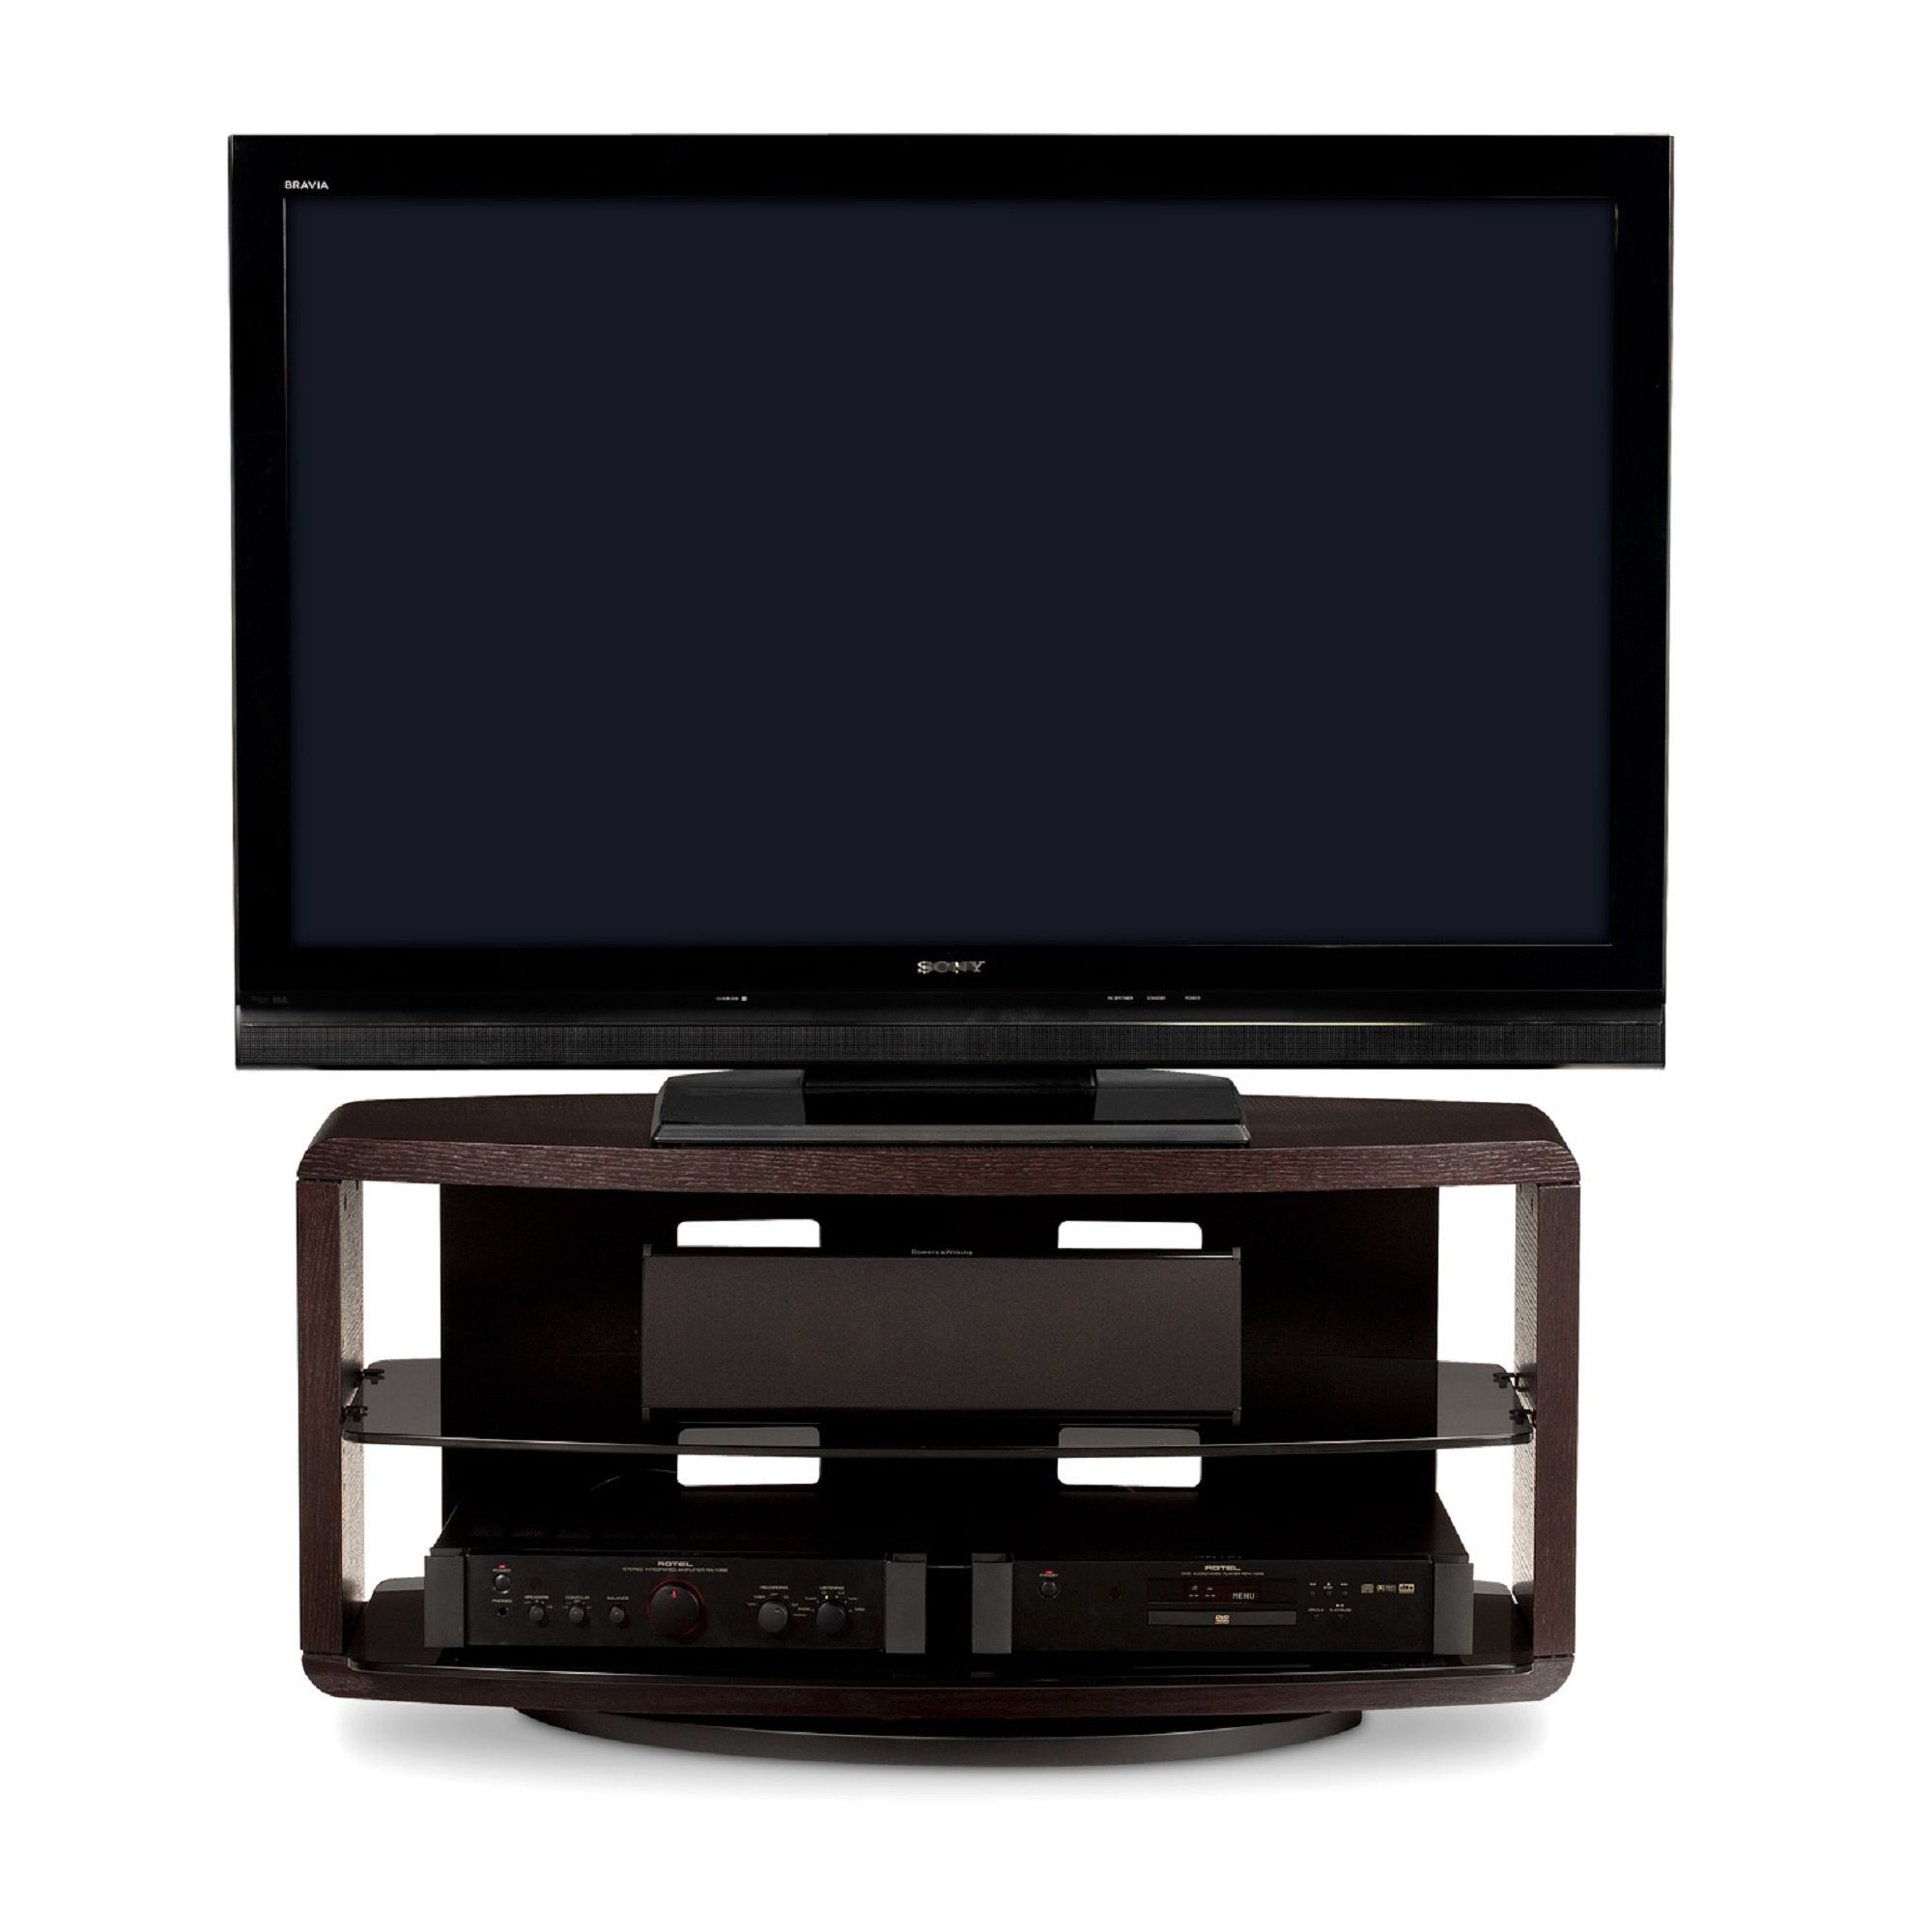 BDI Valera 9724 TV Stand up to 50'' TV's - Espresso Stained Oak at Tesco Direct